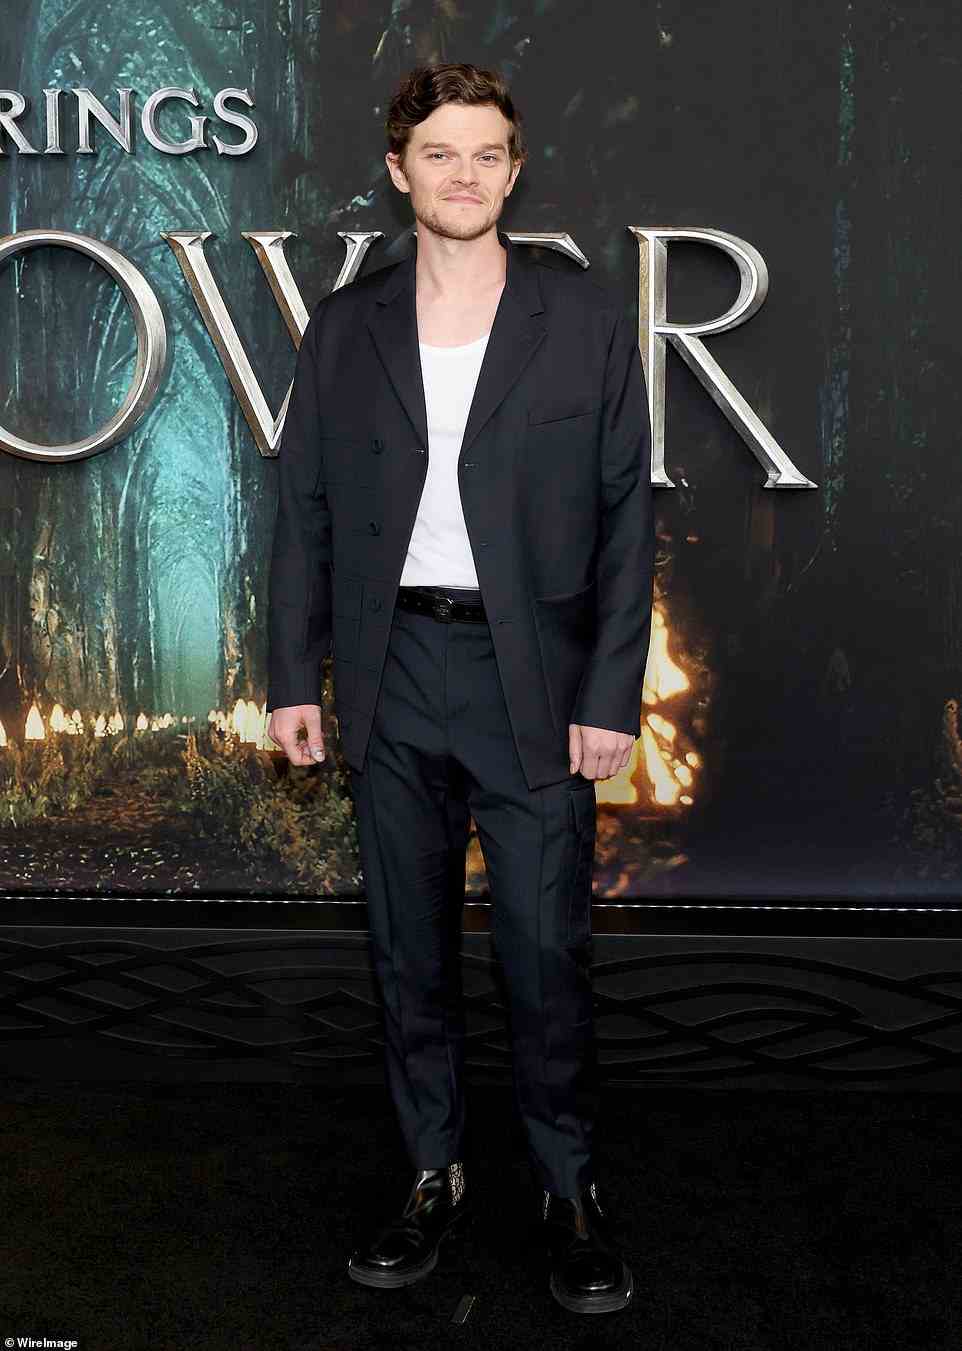 Key character: Robert Aramayo - rocking a white tank beneath a black suit - takes over the role of half-Elf Elrond from SAG Award winner Hugo Weaving, who starred in the Peter Jackson films